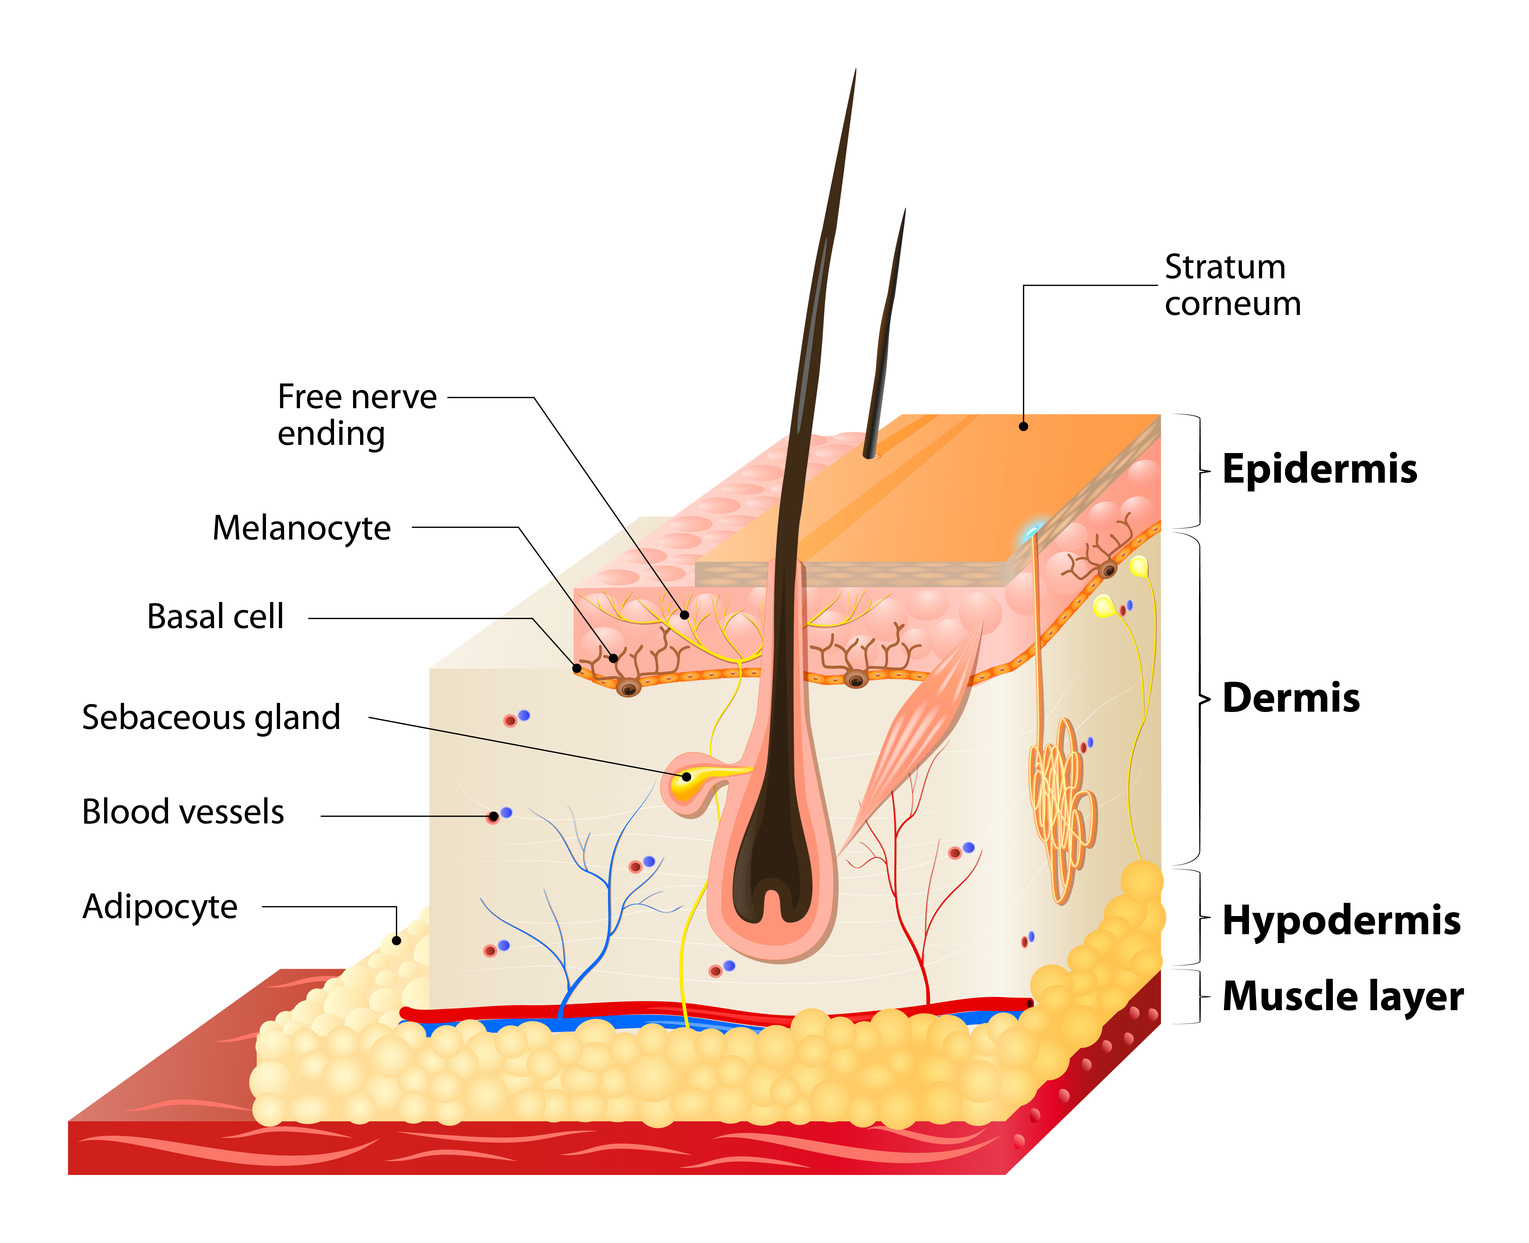 Layers Of Human Skin. Epidermis (horny layer and granular layer), Dermis (connective tissue) and Subcutaneous fat (adipose tissue)